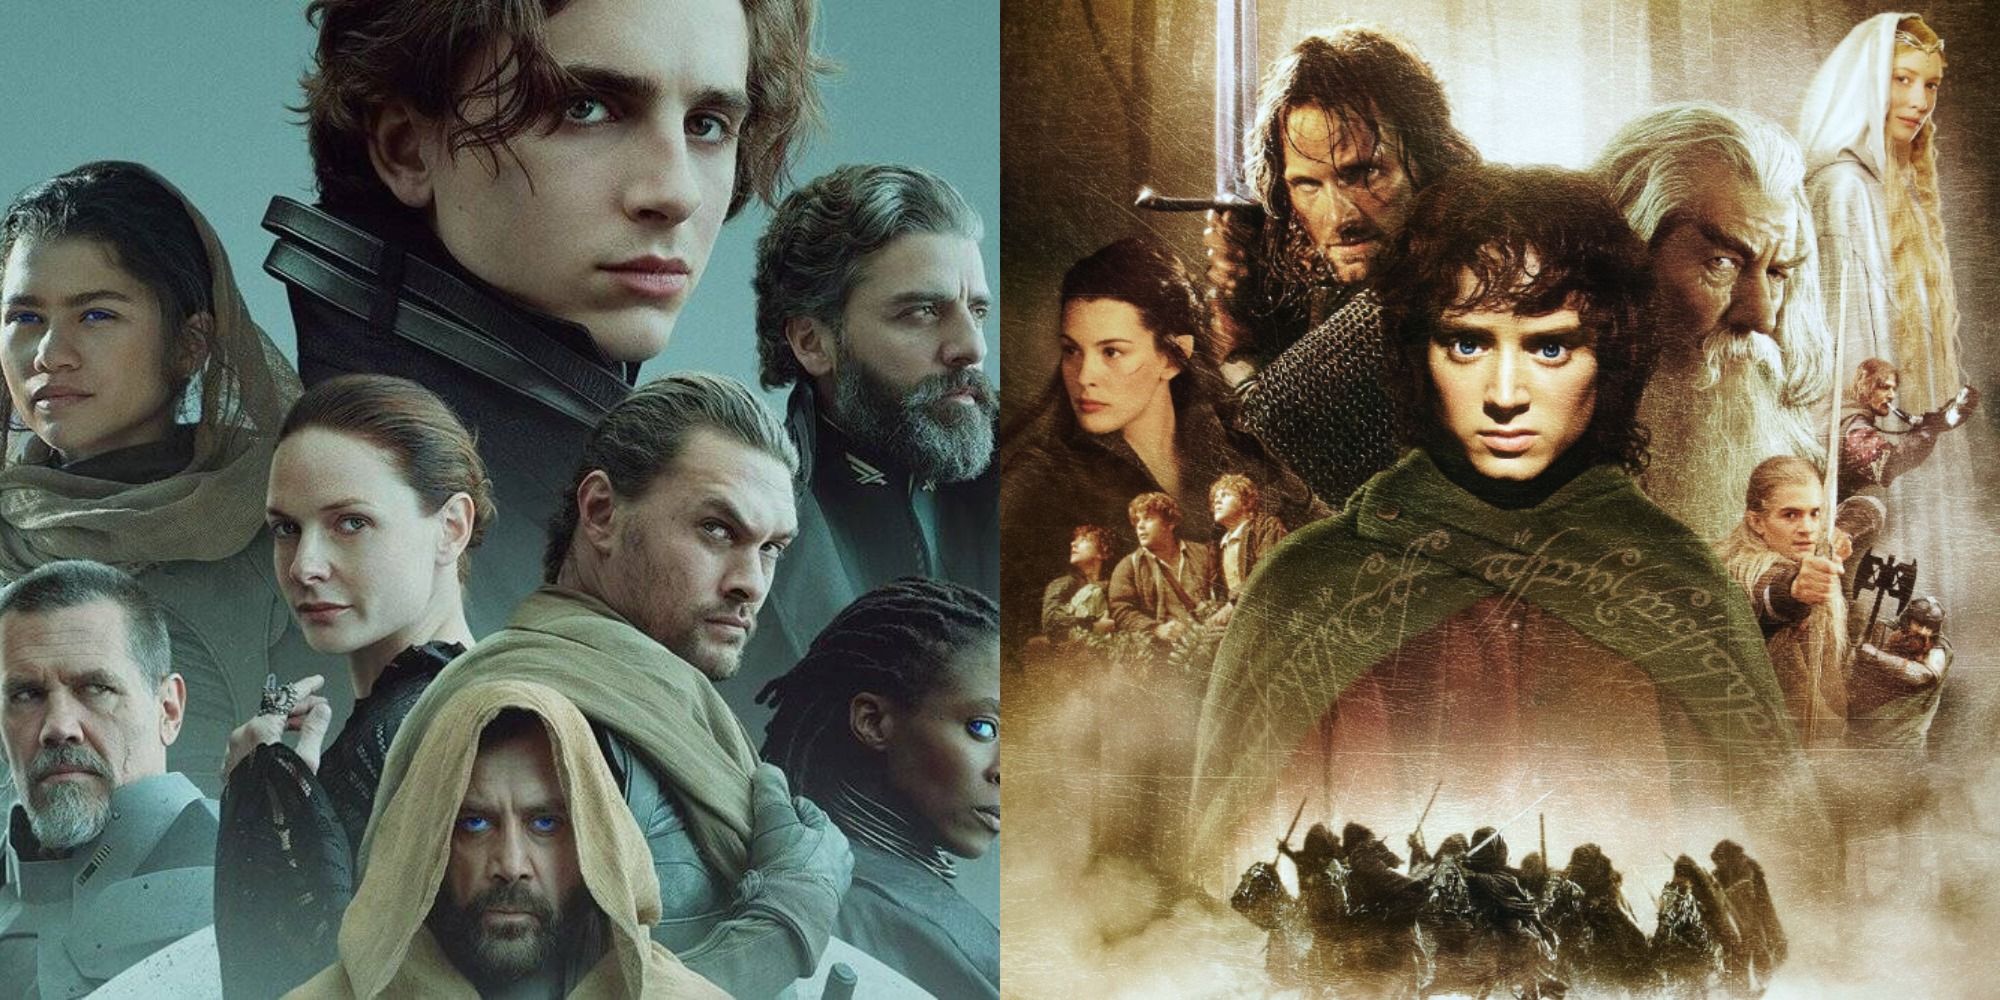 Split image showing characters from Dune and LotR